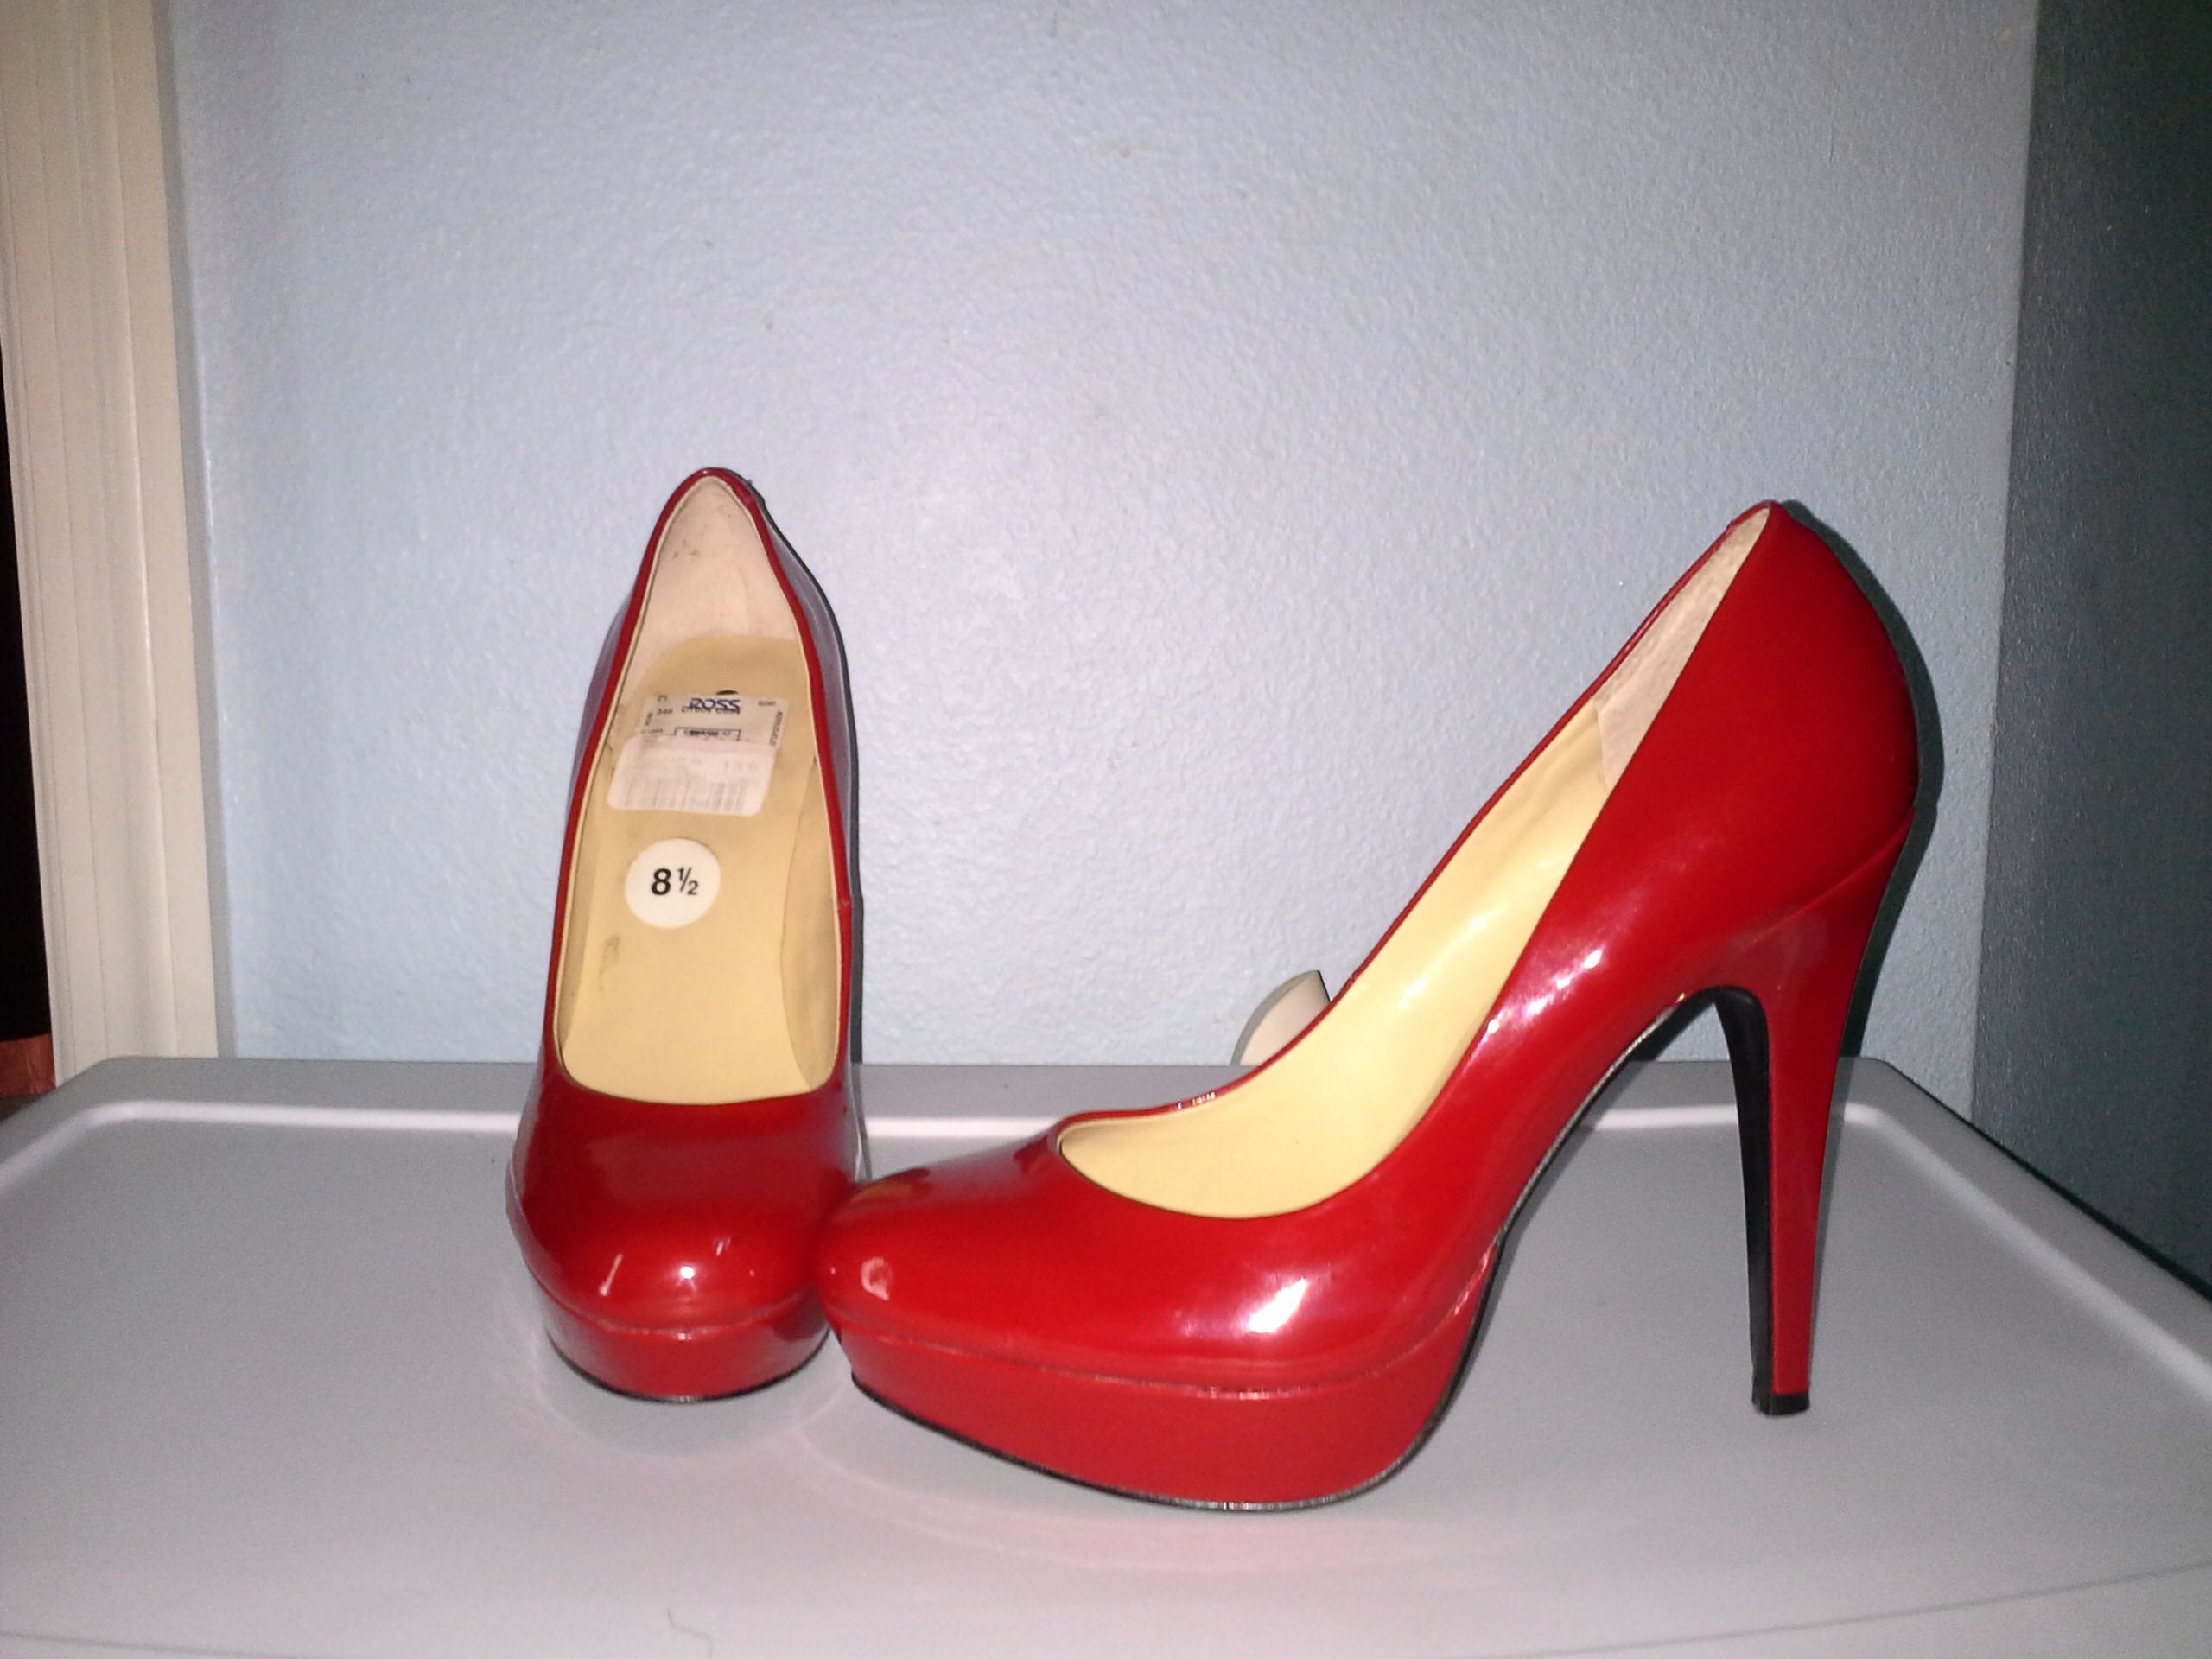 Ladies Shoes size 8 and 8-1/2 in RayRaysStuff's Garage Sale Haines City, FL